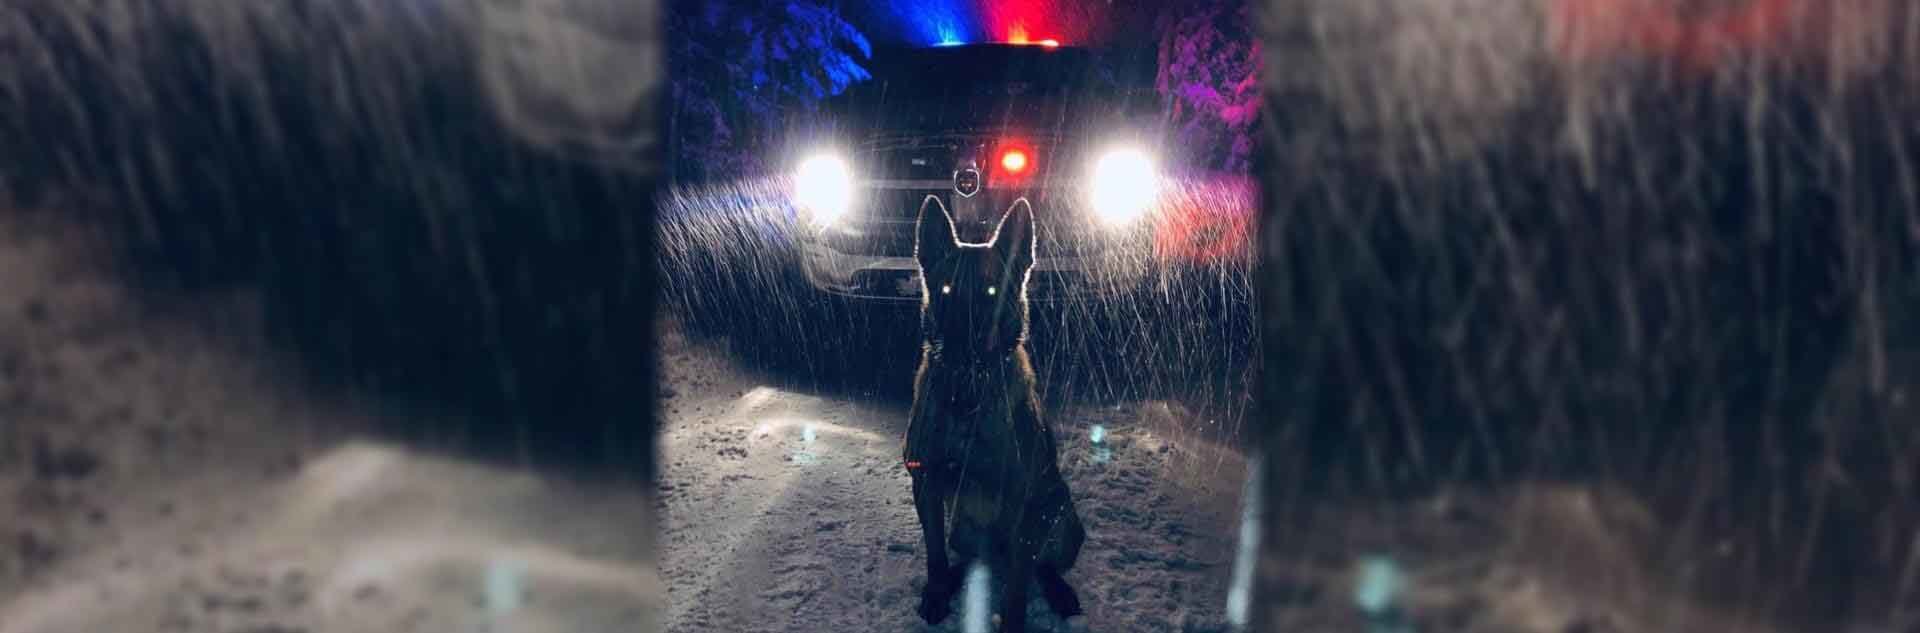 K-9 in front of a patrol car in a winter storm.